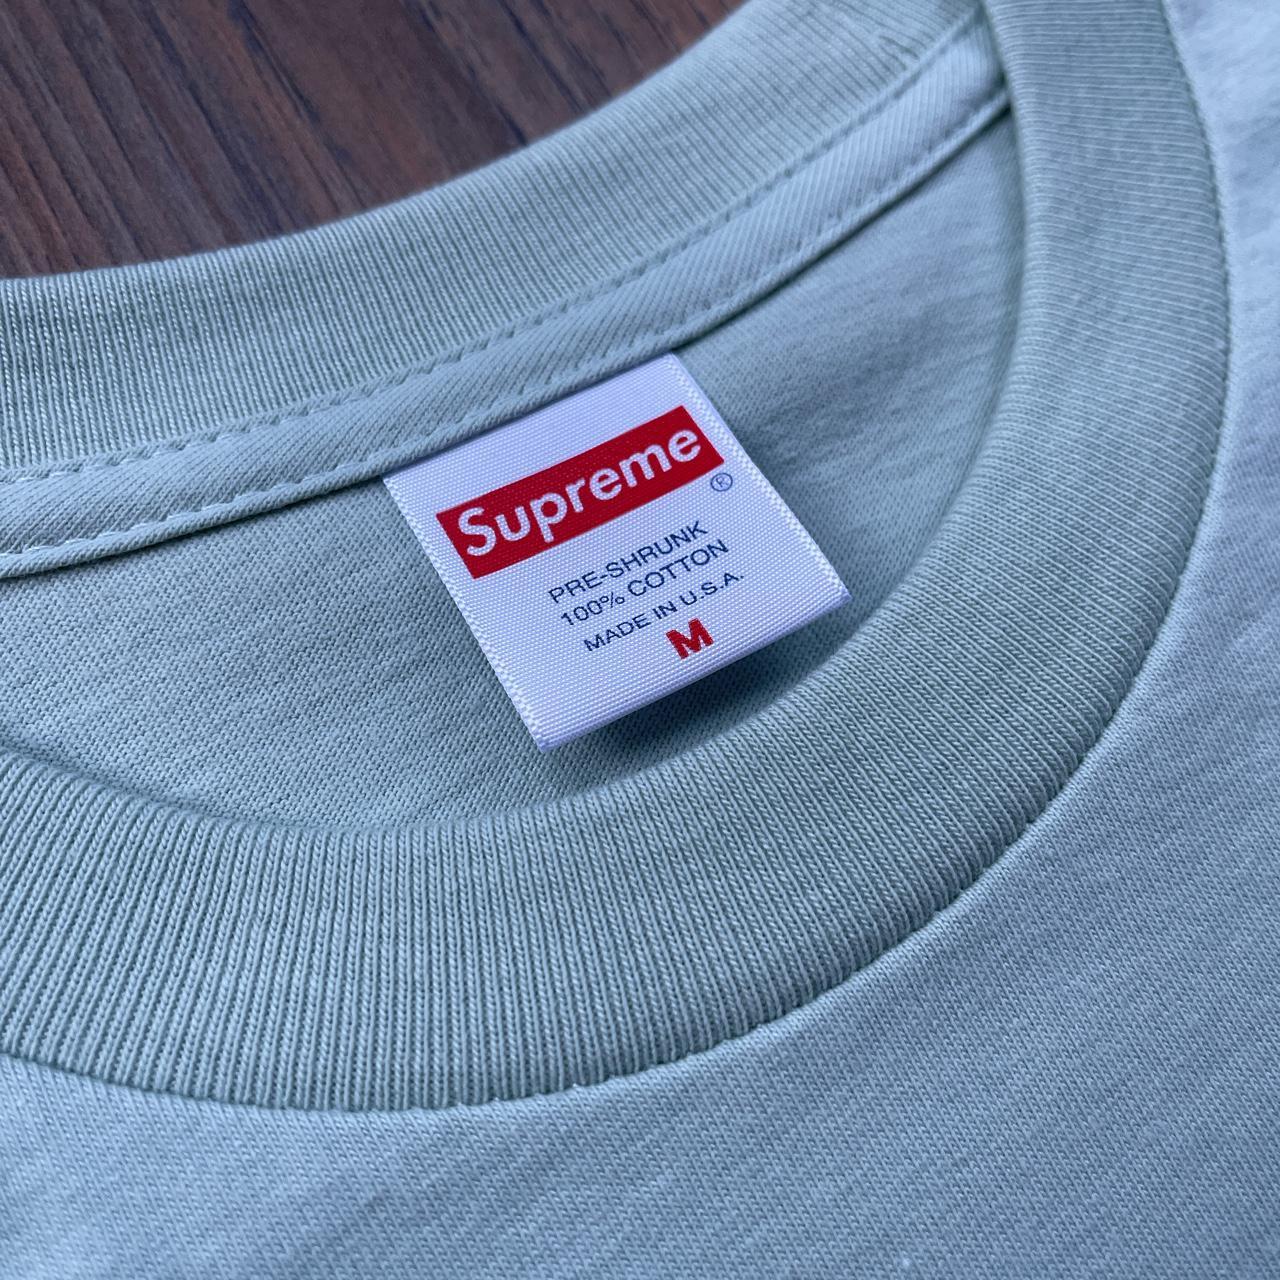 Supreme Wind Tee SS21 Pale Aqua. Shirt is out of... - Depop